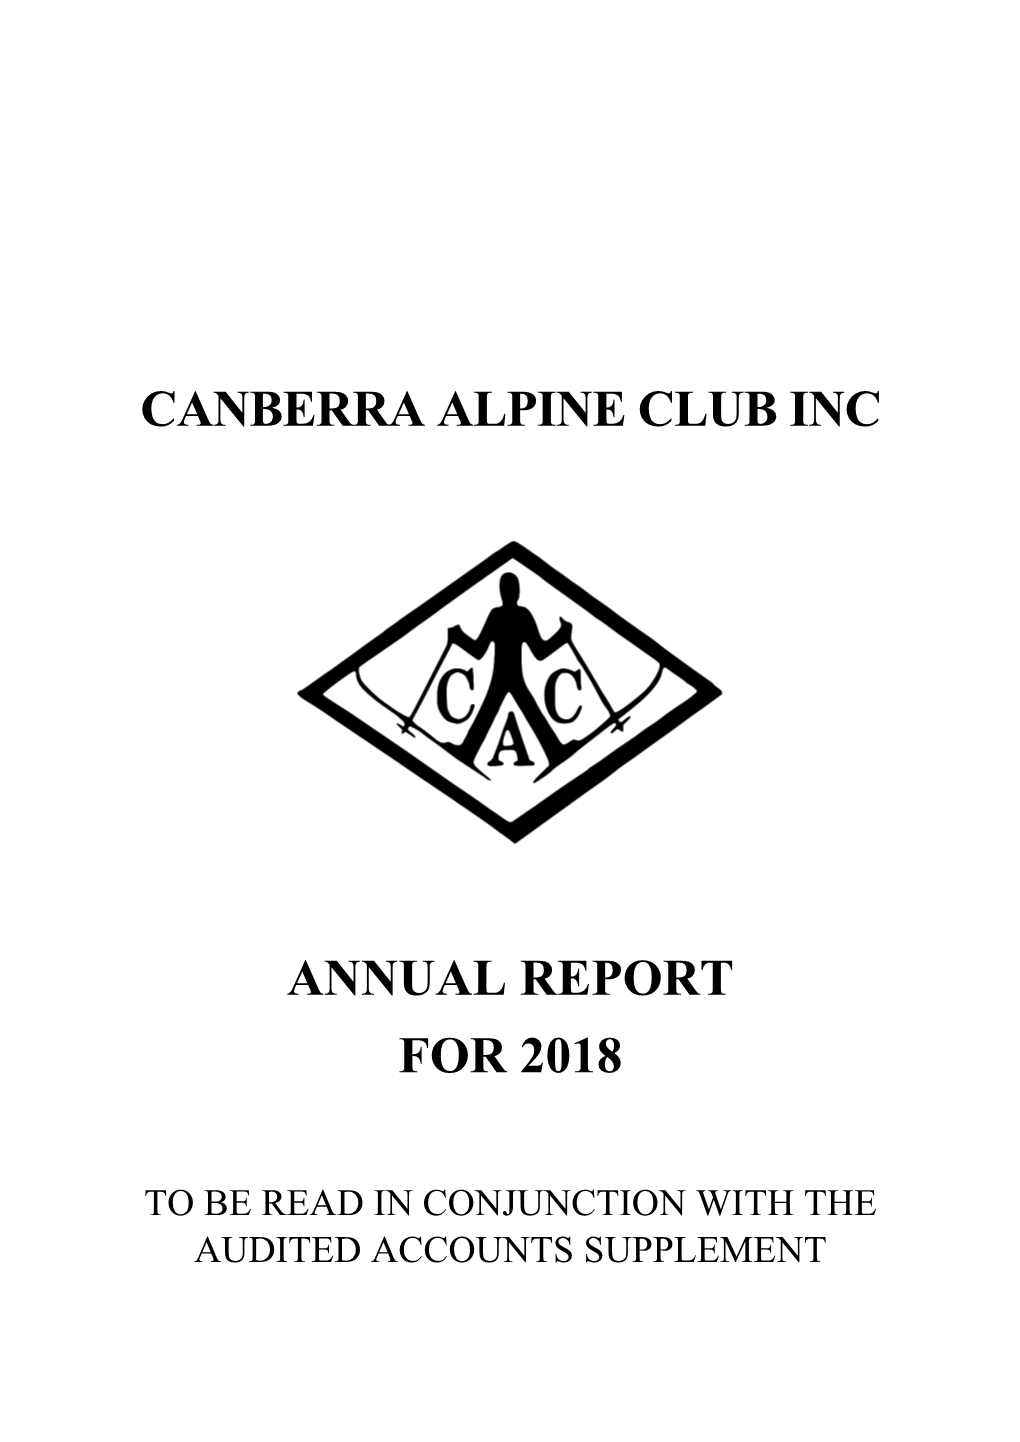 Canberra Alpine Club Inc Annual Report for 2018